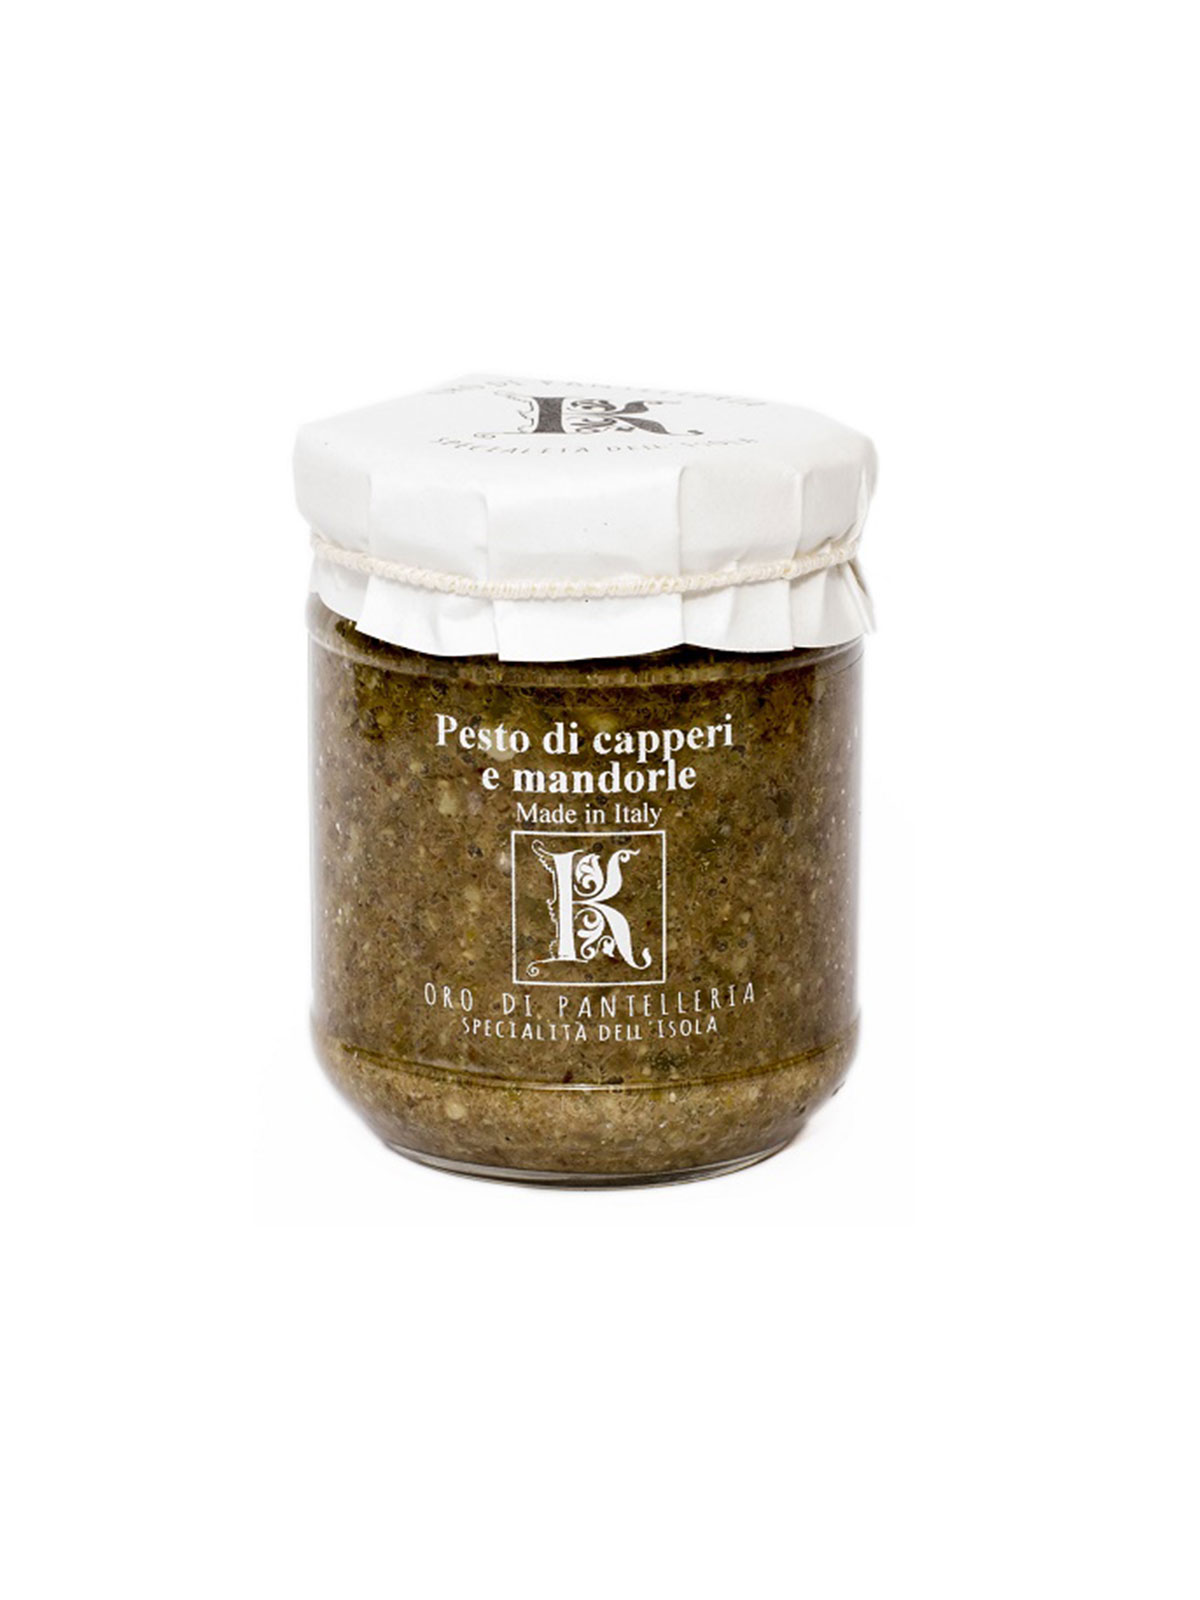 KAZZEN PESTO WITH CAPERS AND ALMONDS 195 GR - Olives & Capers, Pantry, Sauces & Condiments - Buon'Italia